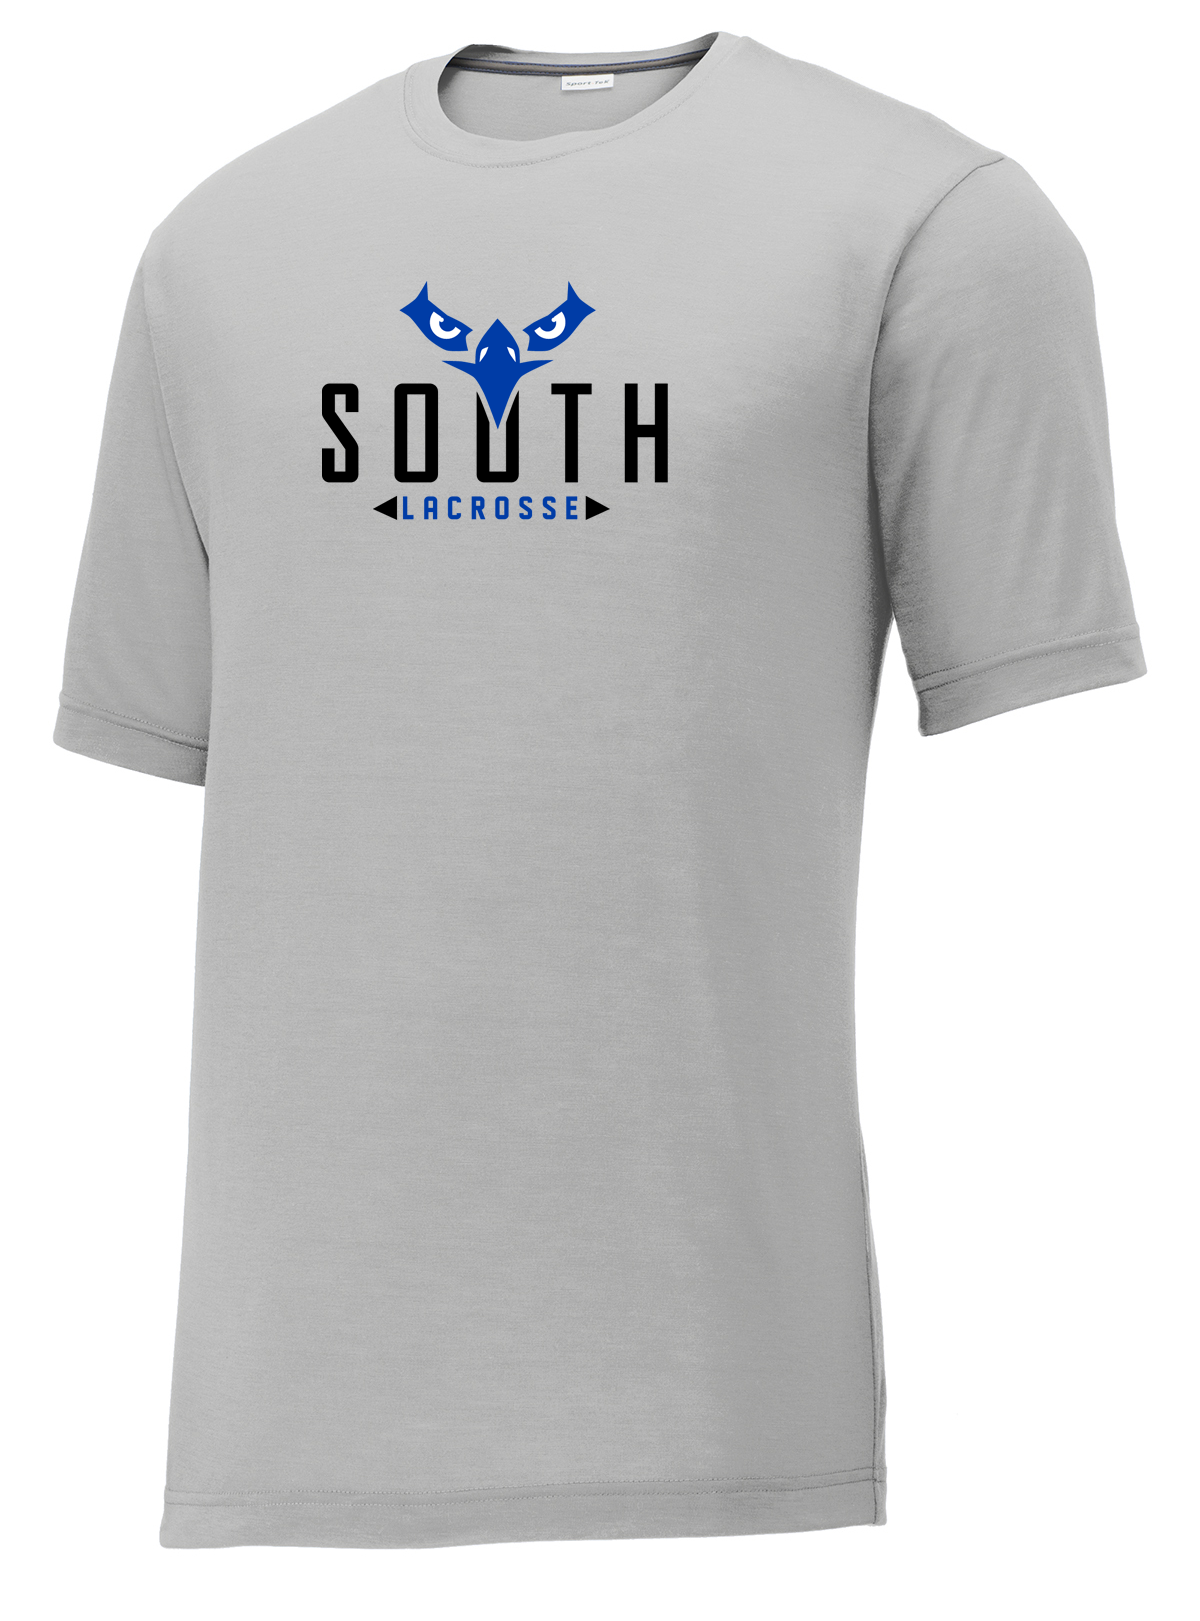 South Forsyth Girls Lacrosse CottonTouch Performance T-Shirt